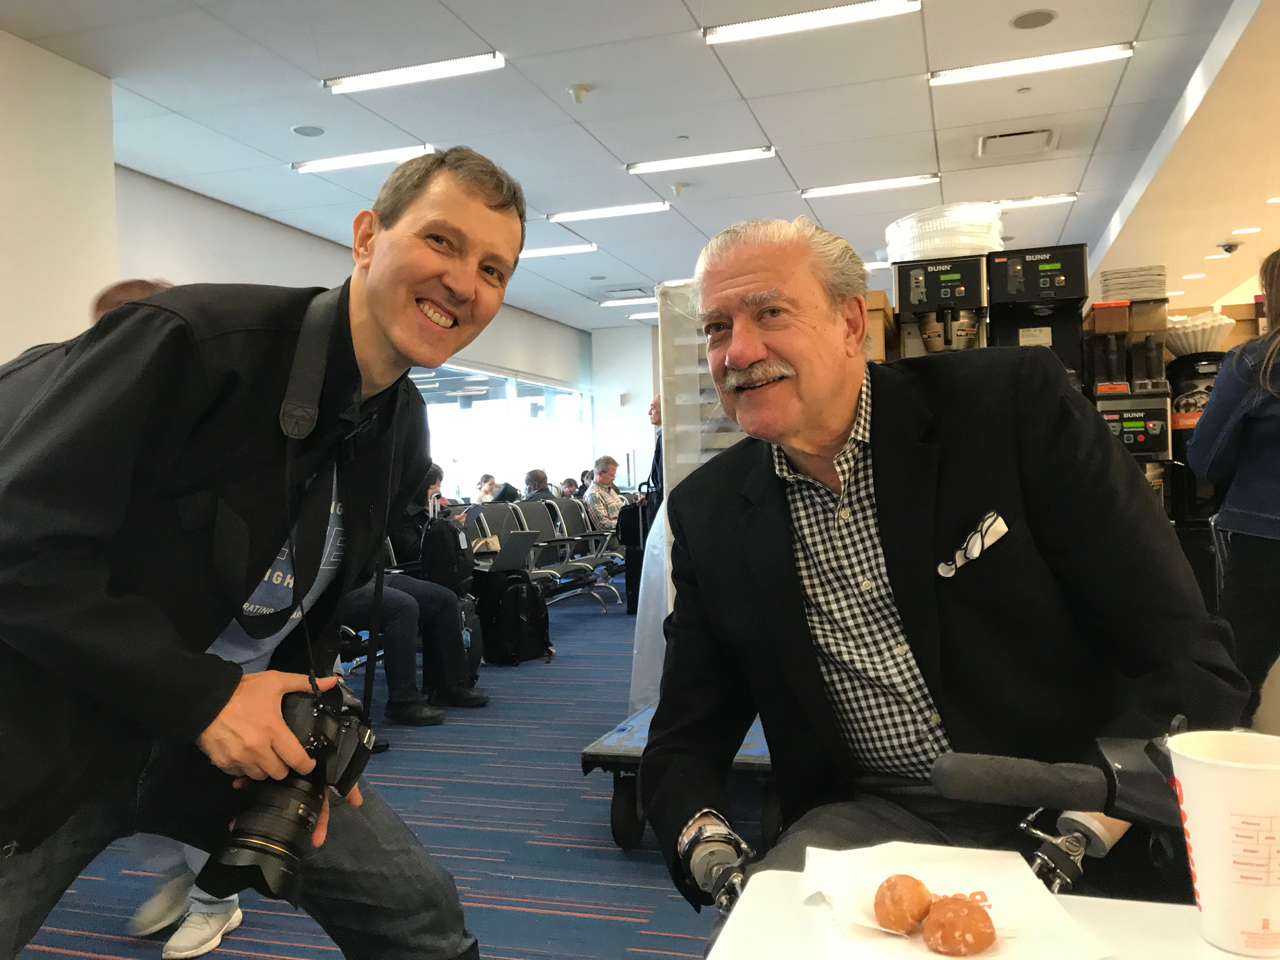 Michael Hosenfeld with John D. Kemp, the President & CEO of The Viscardi Center, at the John F. Kennedy Airport. 